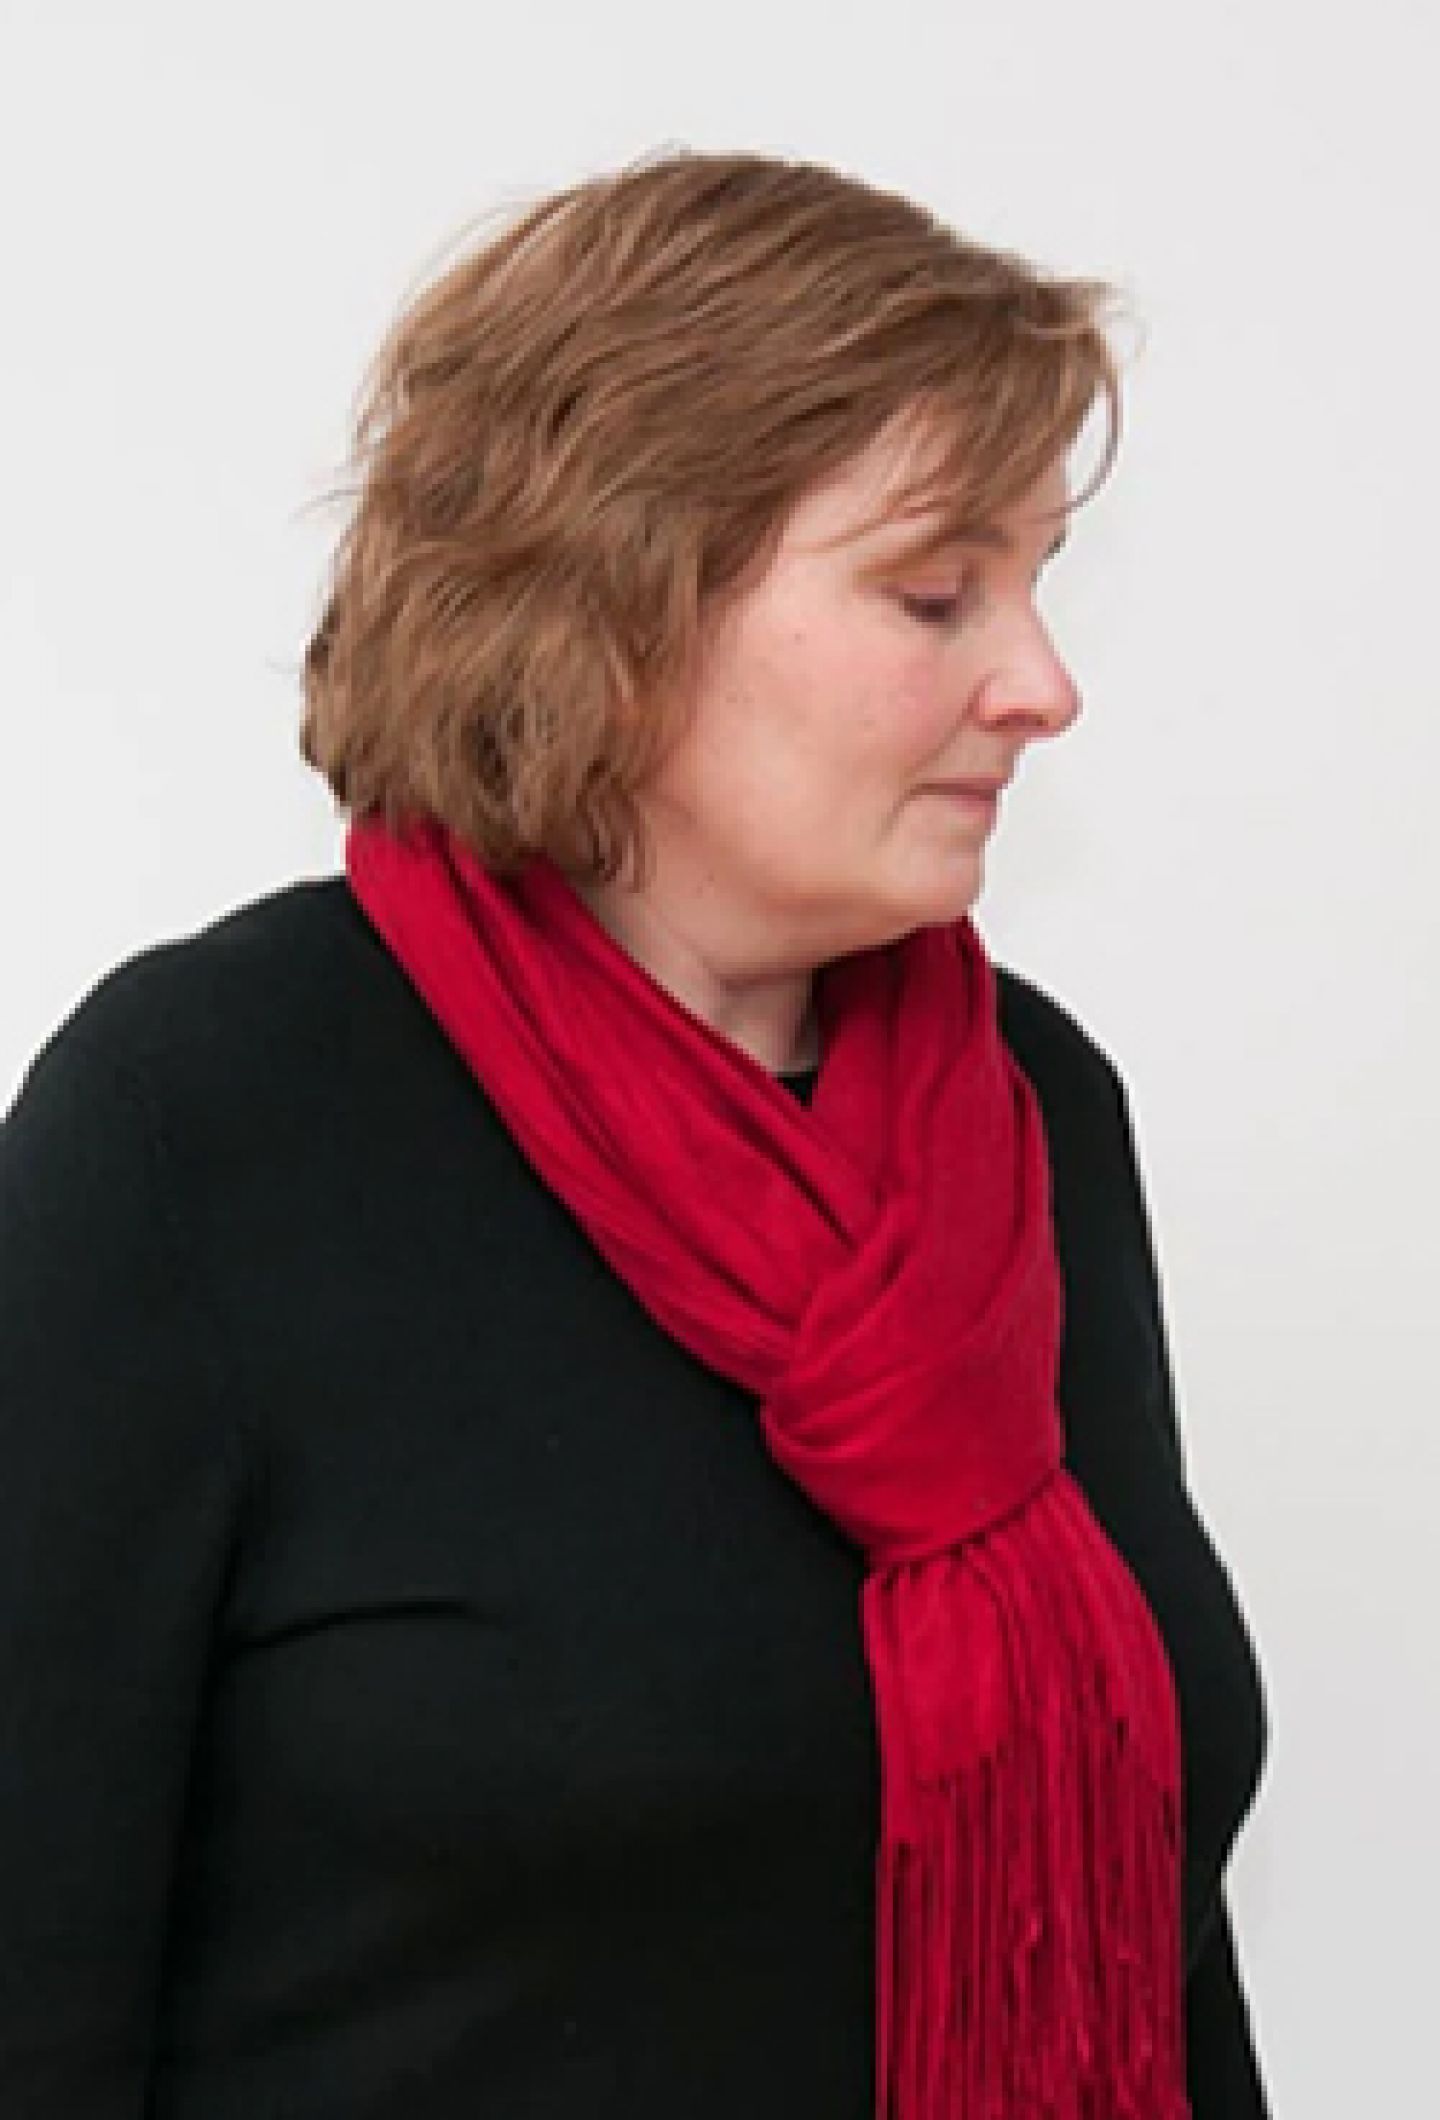 Catherine Laws, Professor of Music at the University of York